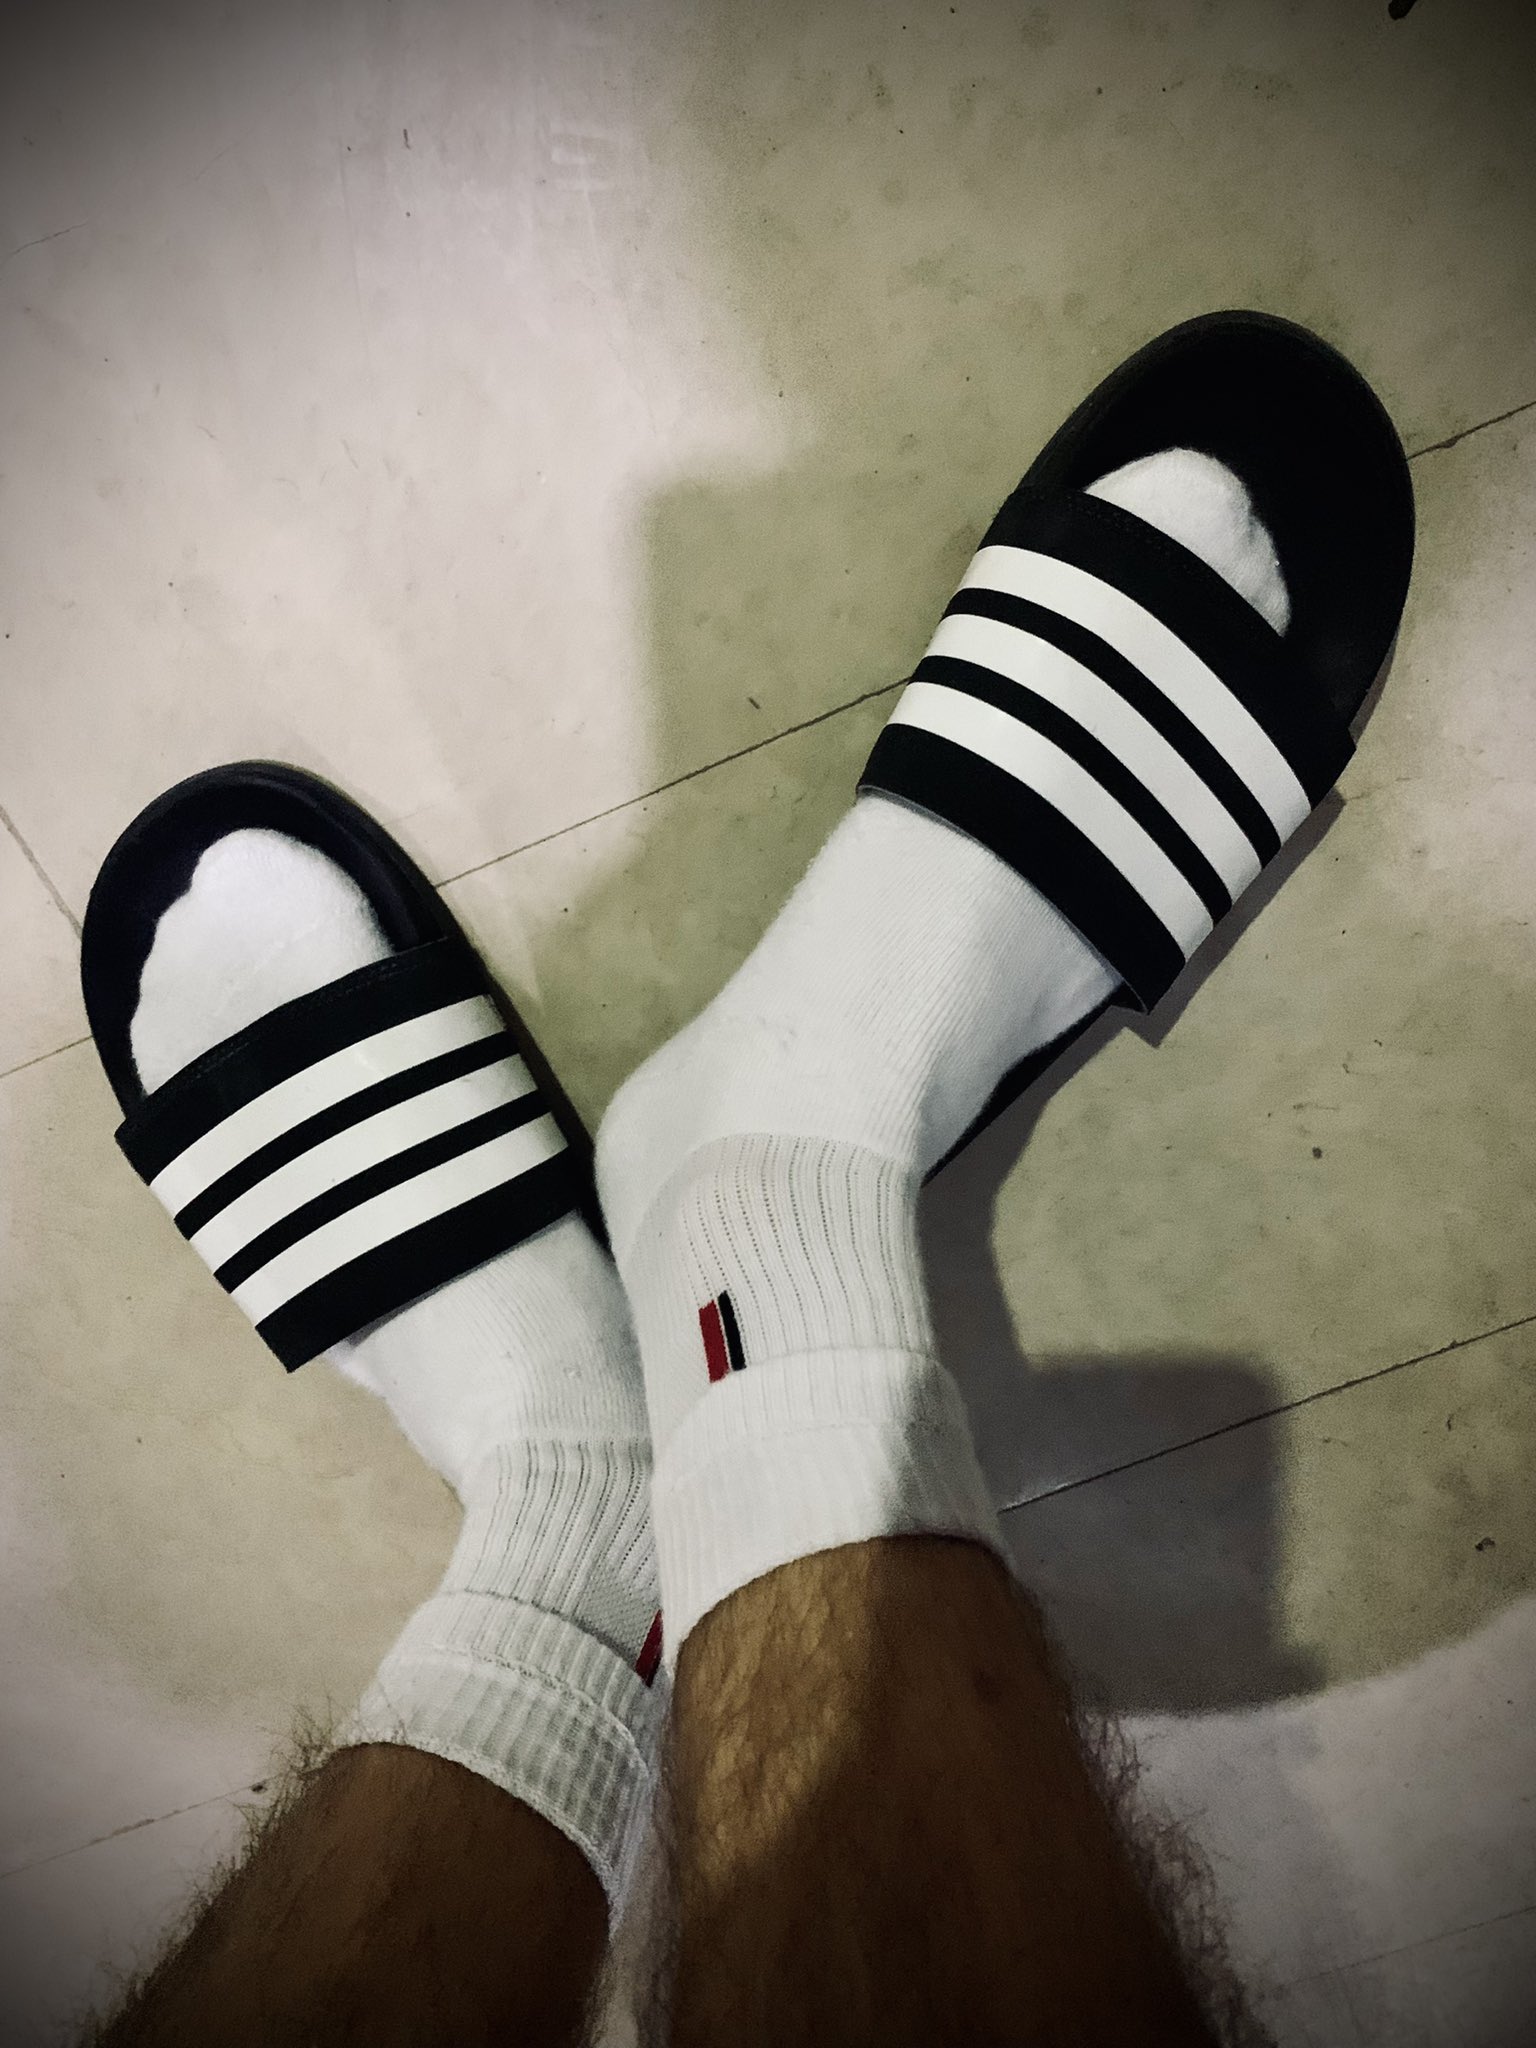 Relación Personificación Profecía The World in White Socks on Twitter: "A sexy pair of white socks and Adidas  slides to go run some neighbourhood errands in this morning. 😌🧦  #Adidasslides #Socks #Adidas #whitesocks #slides #socksandslides #